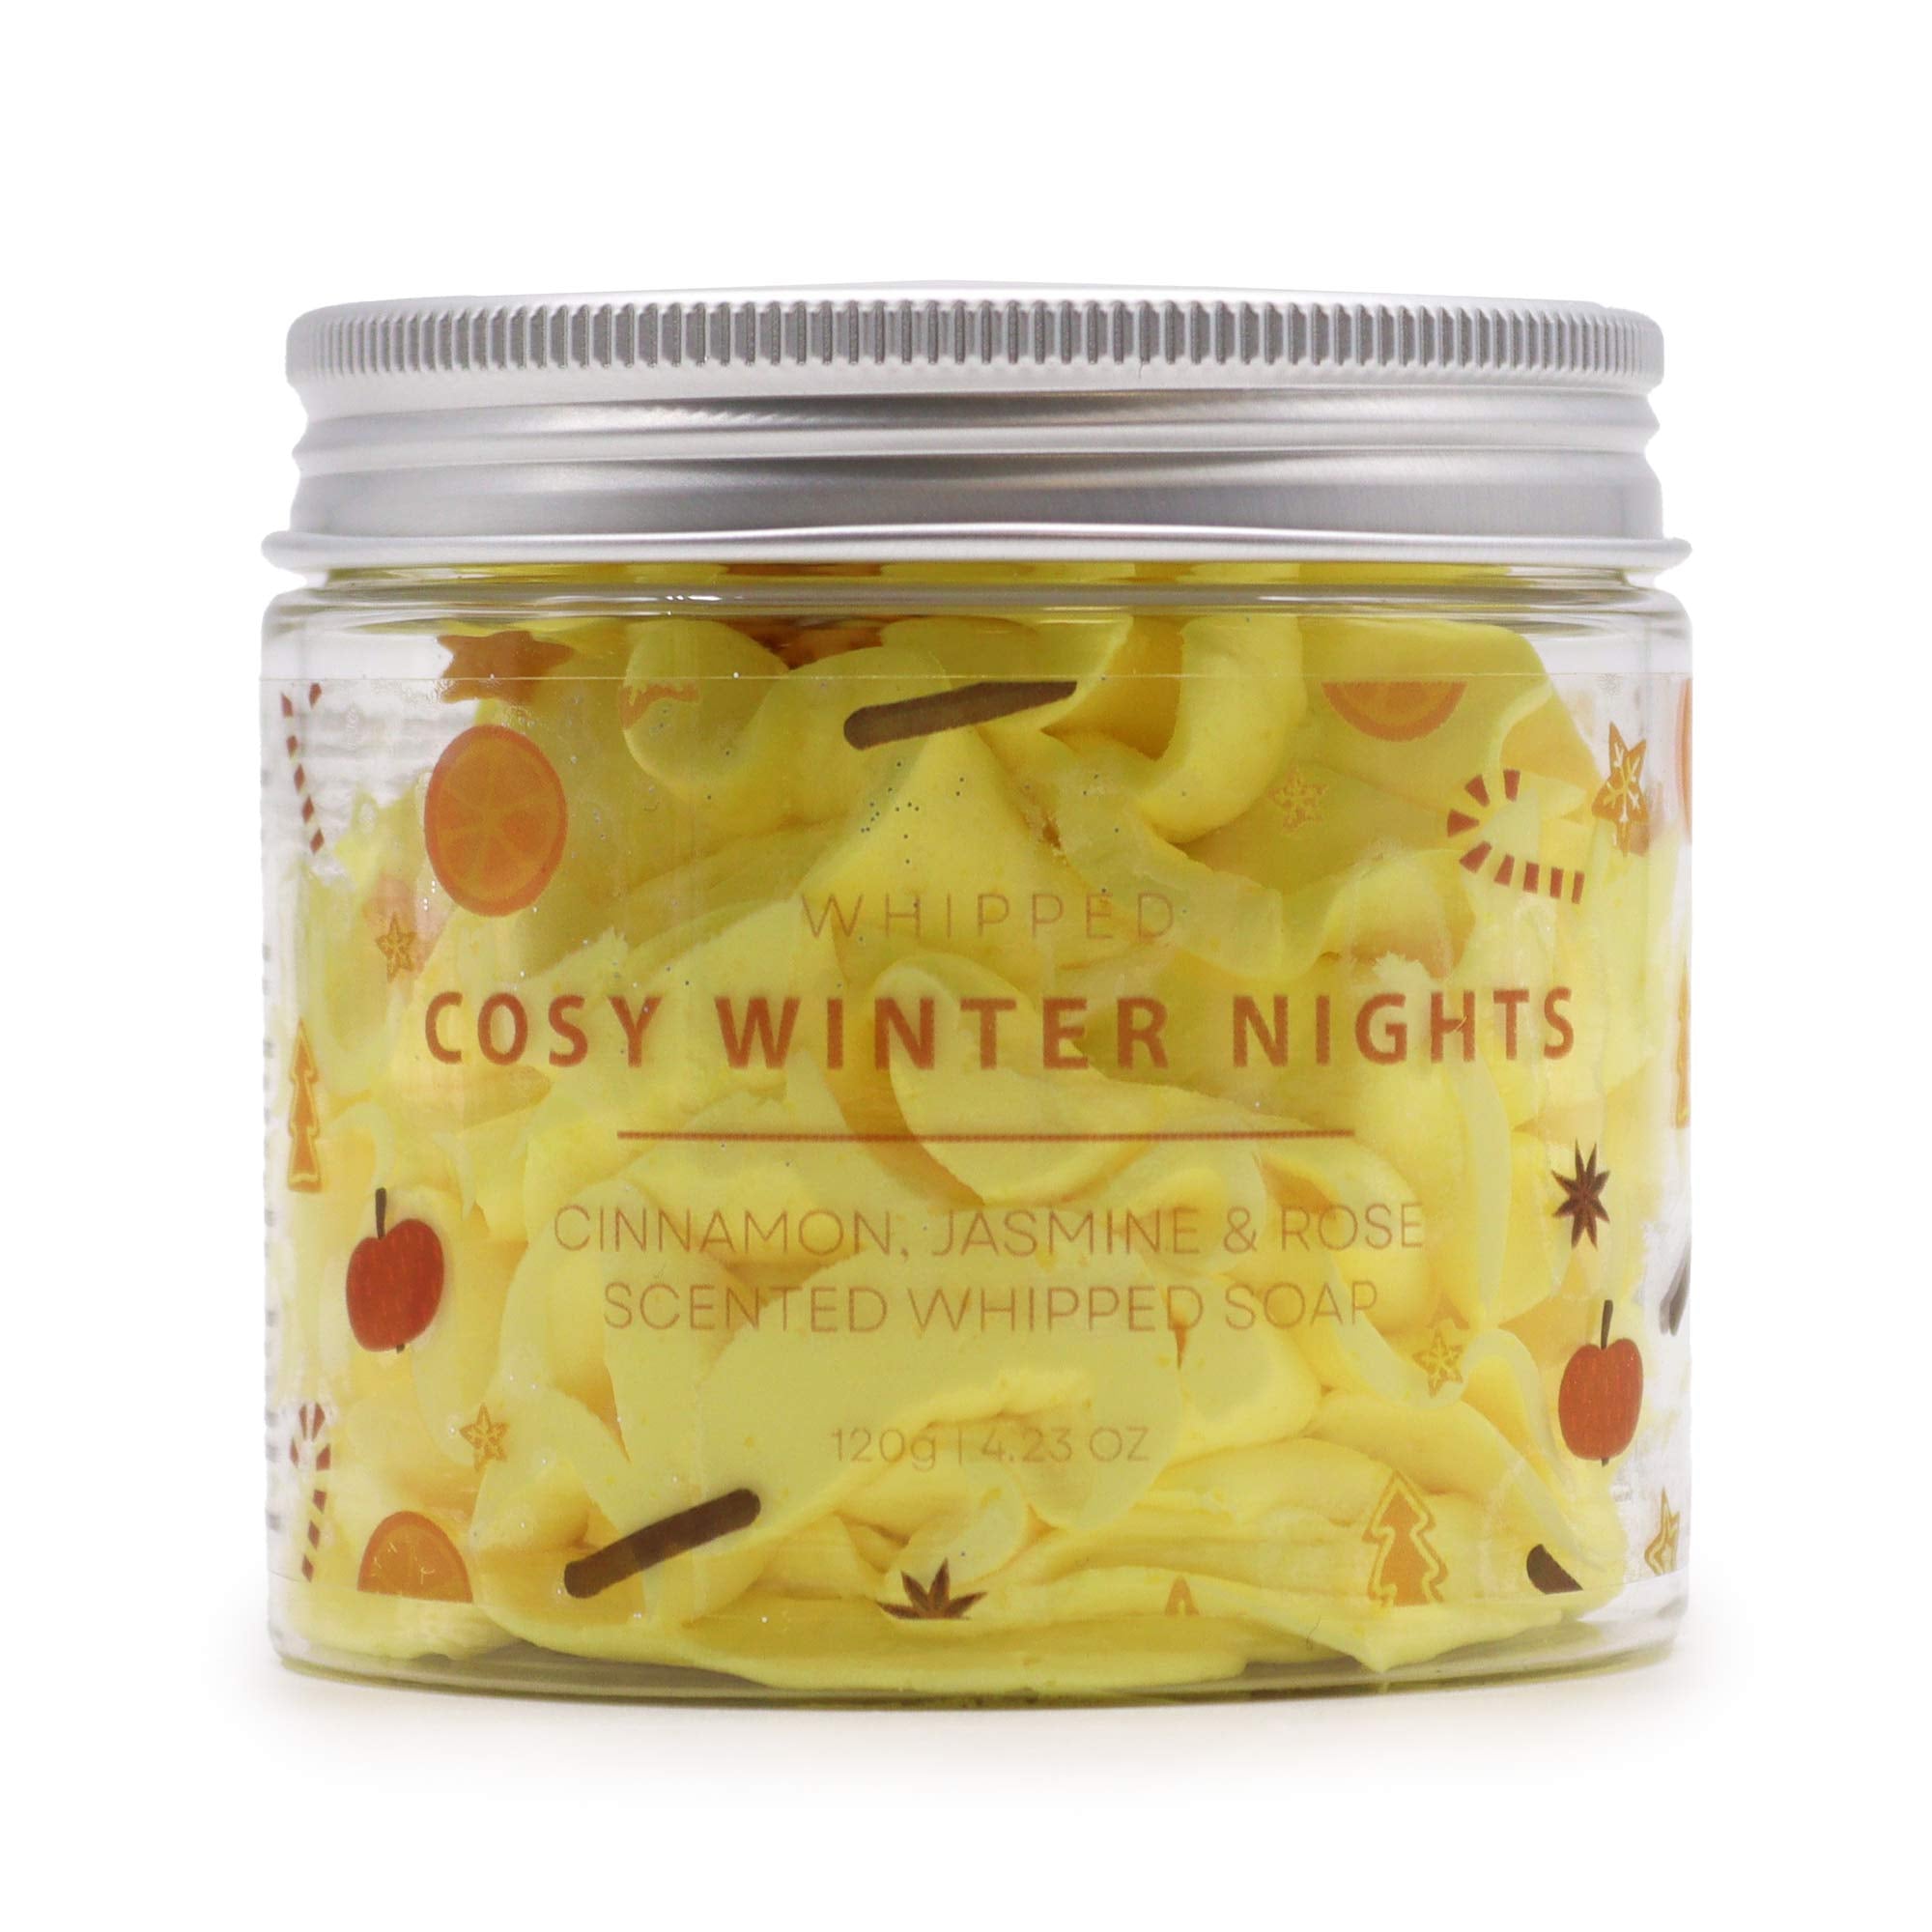 Cosy Winter Nights Whipped Cream Soap, 120g